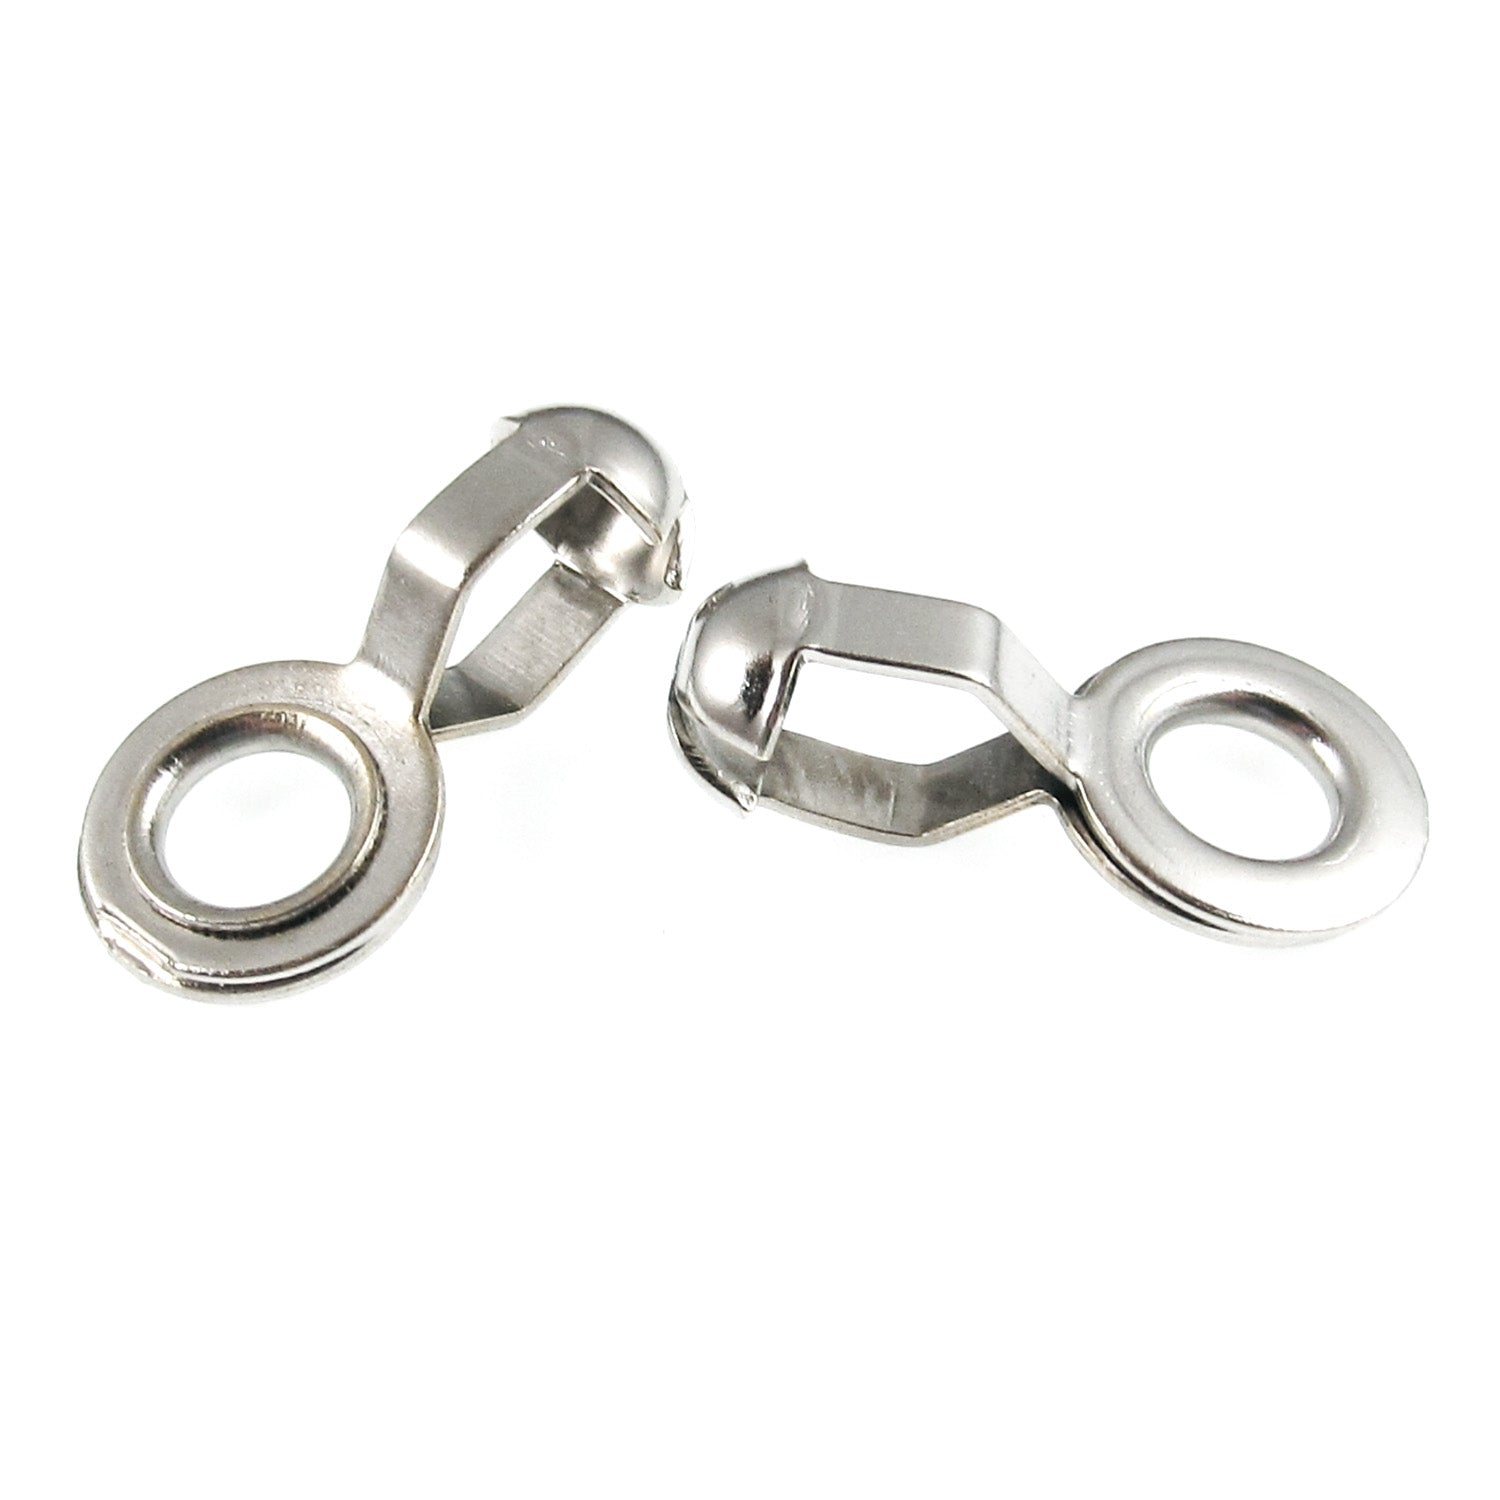 Number 10 Ball Chain Connectors Nickel Plated Steel